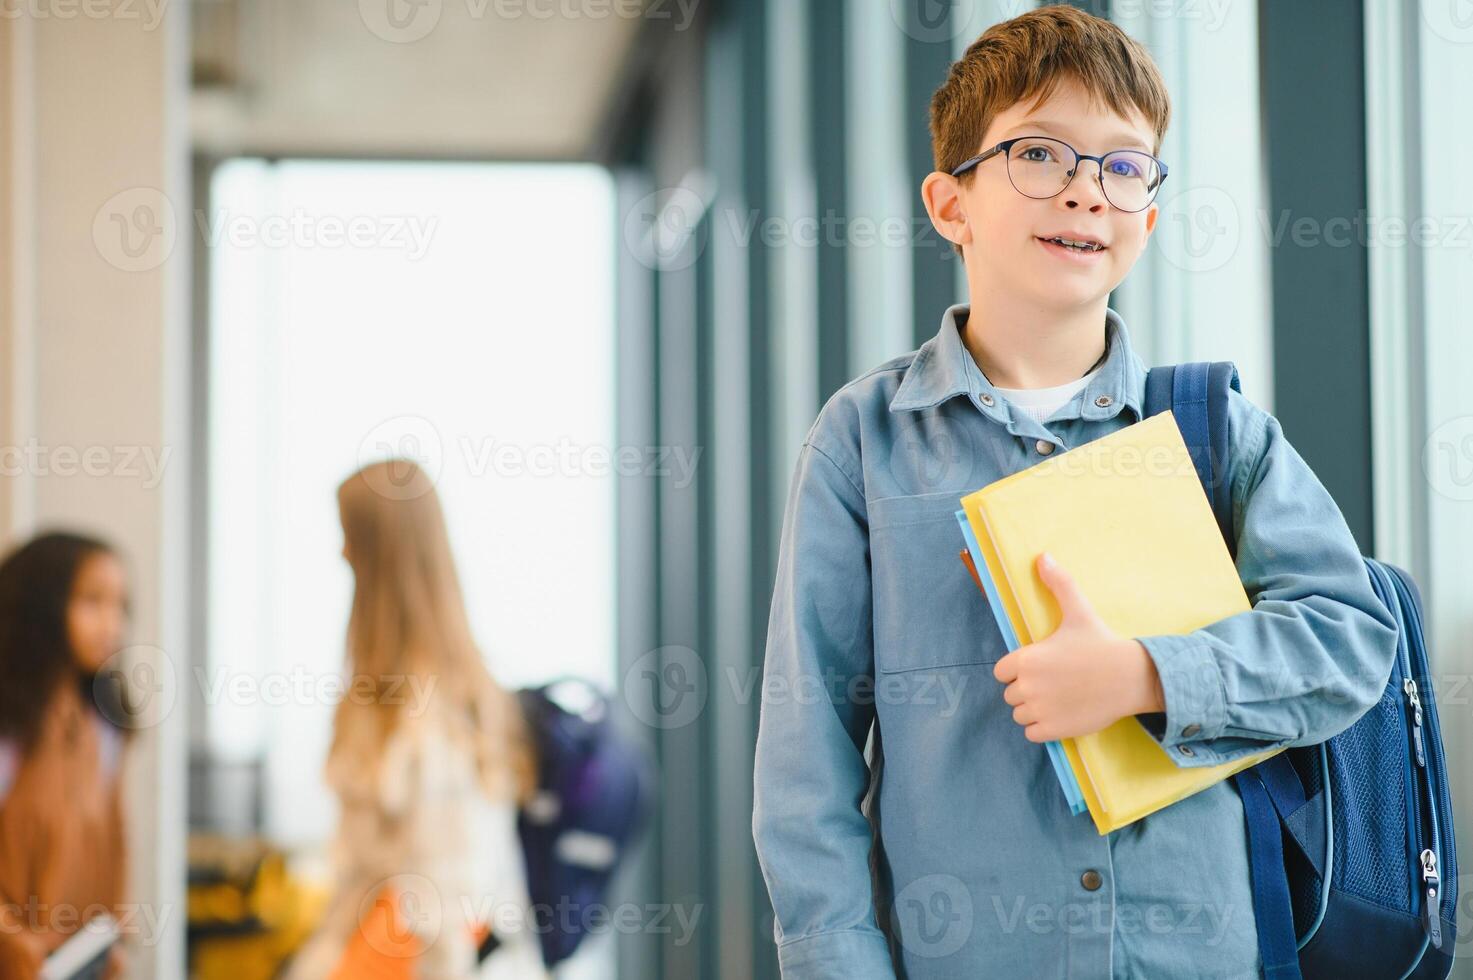 Schoolboy with schoolbag and books in the school. Education concept. Back to school. Schoolkid going to class. Stylish boy with backpack. Boy ready to study photo